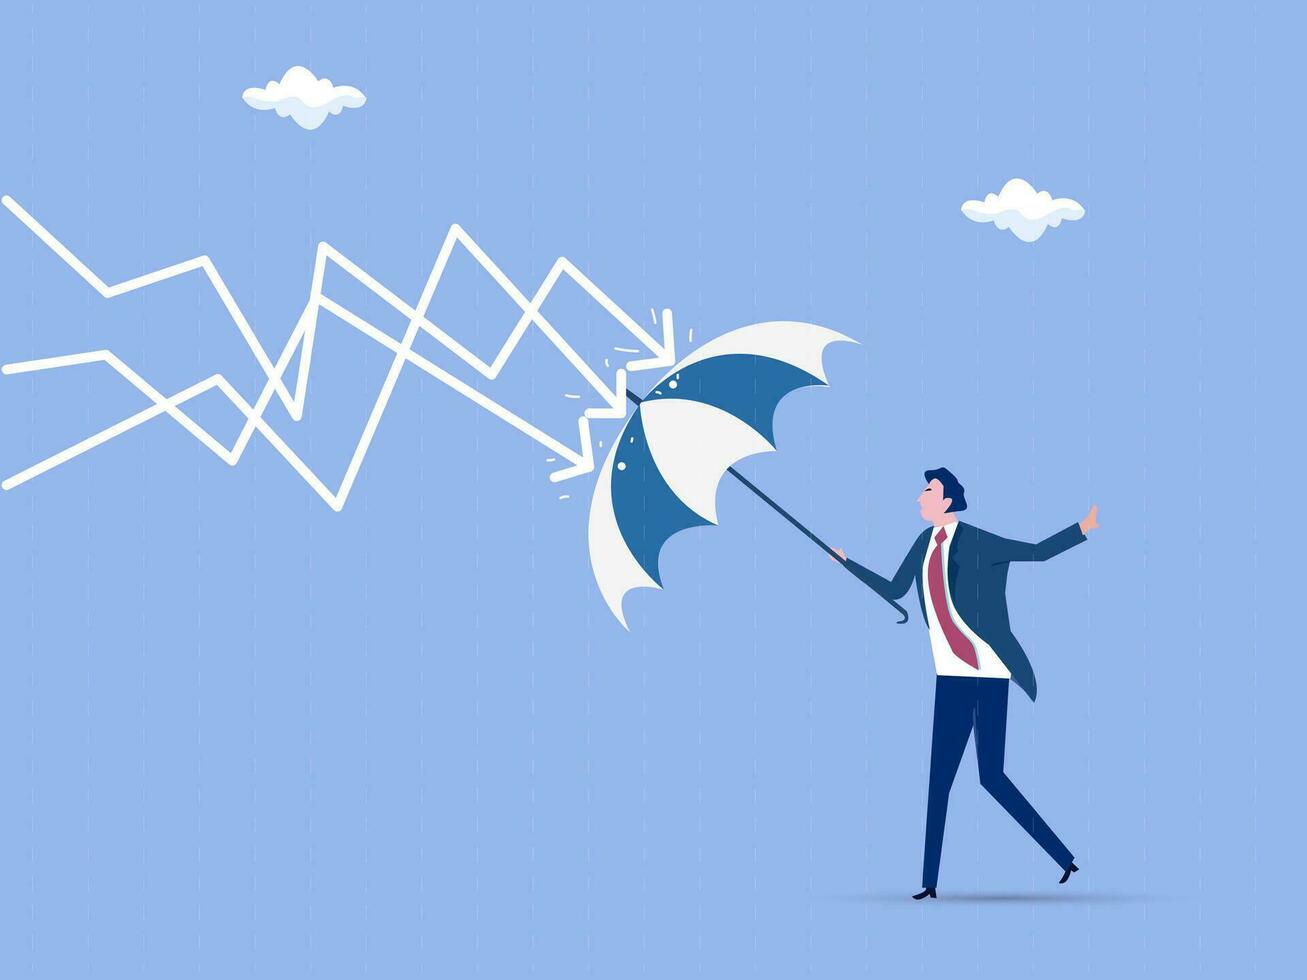 Protection or defensive stock in economy crisis or market crash, business resilient to survive difficulty or insurance concept, businessman holding umbrella to cover and protect from downturn arrow. vector